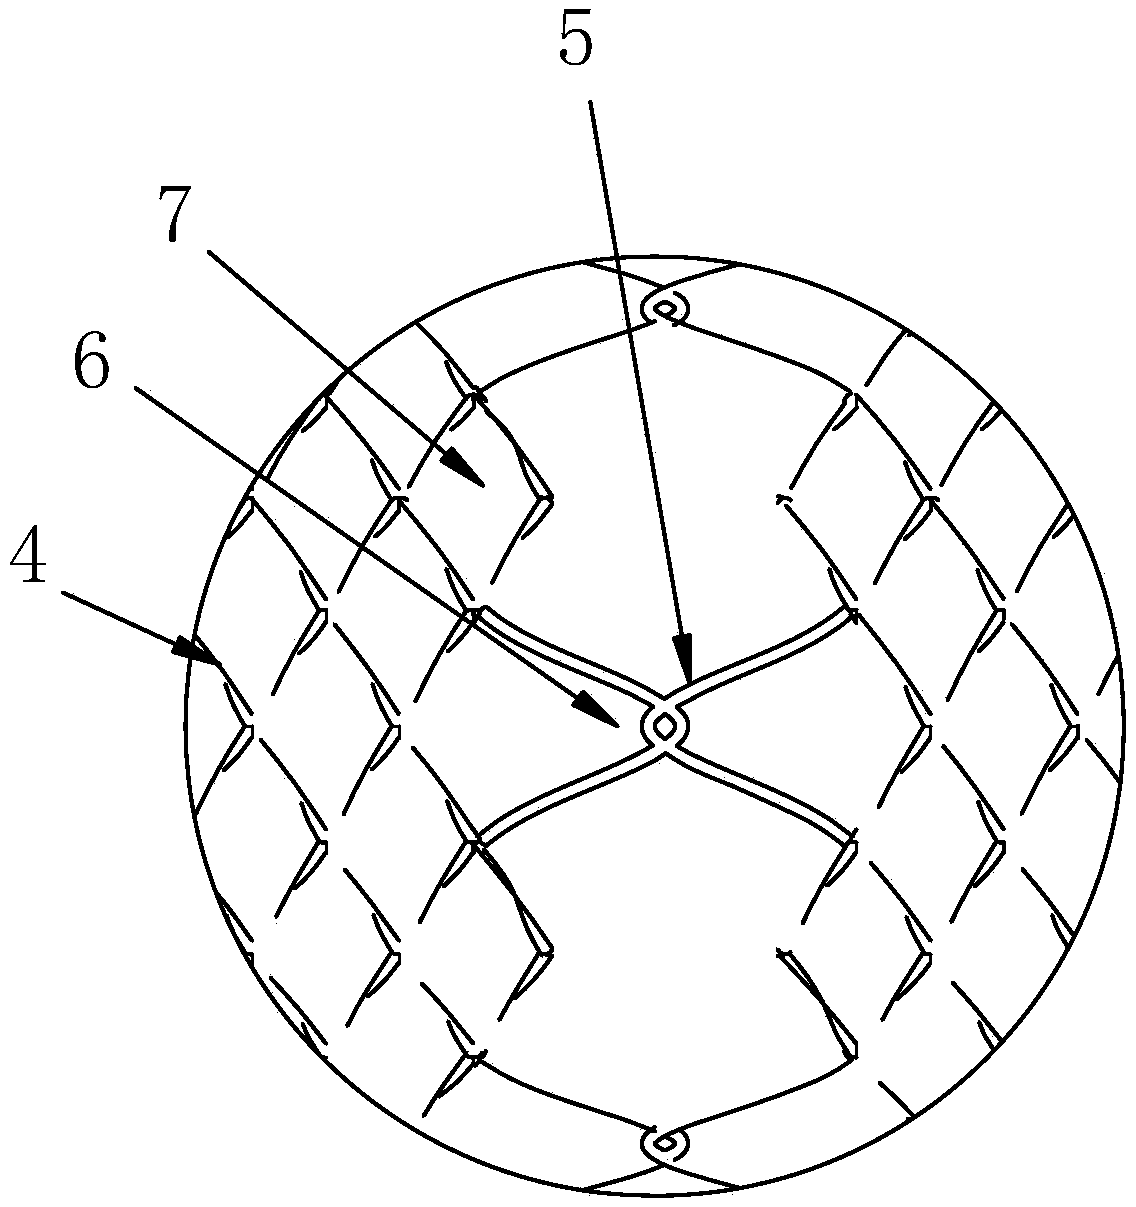 A super-compliant segmented stent and its weaving method